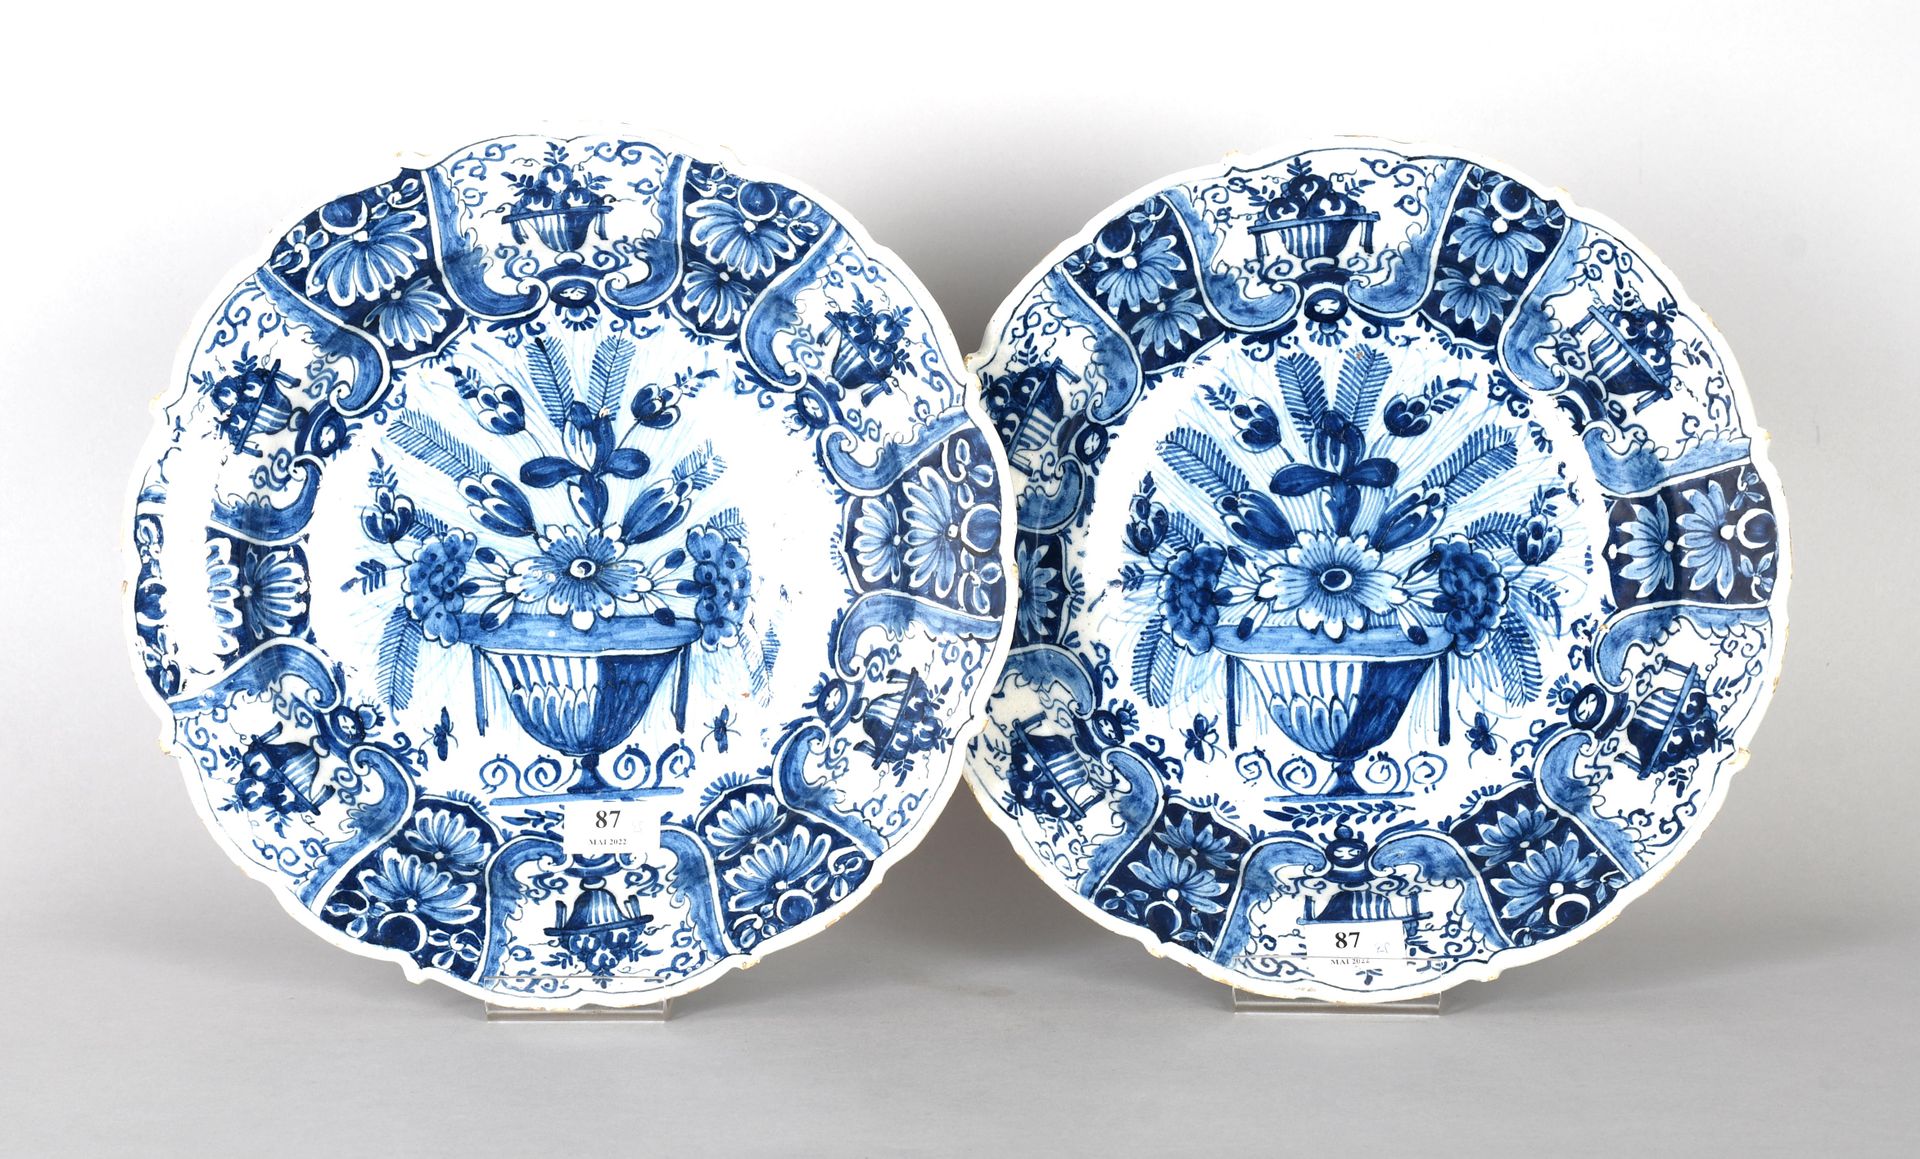 Null Delft, 18th century

Pair of deep round dishes with curved edge decorated i&hellip;